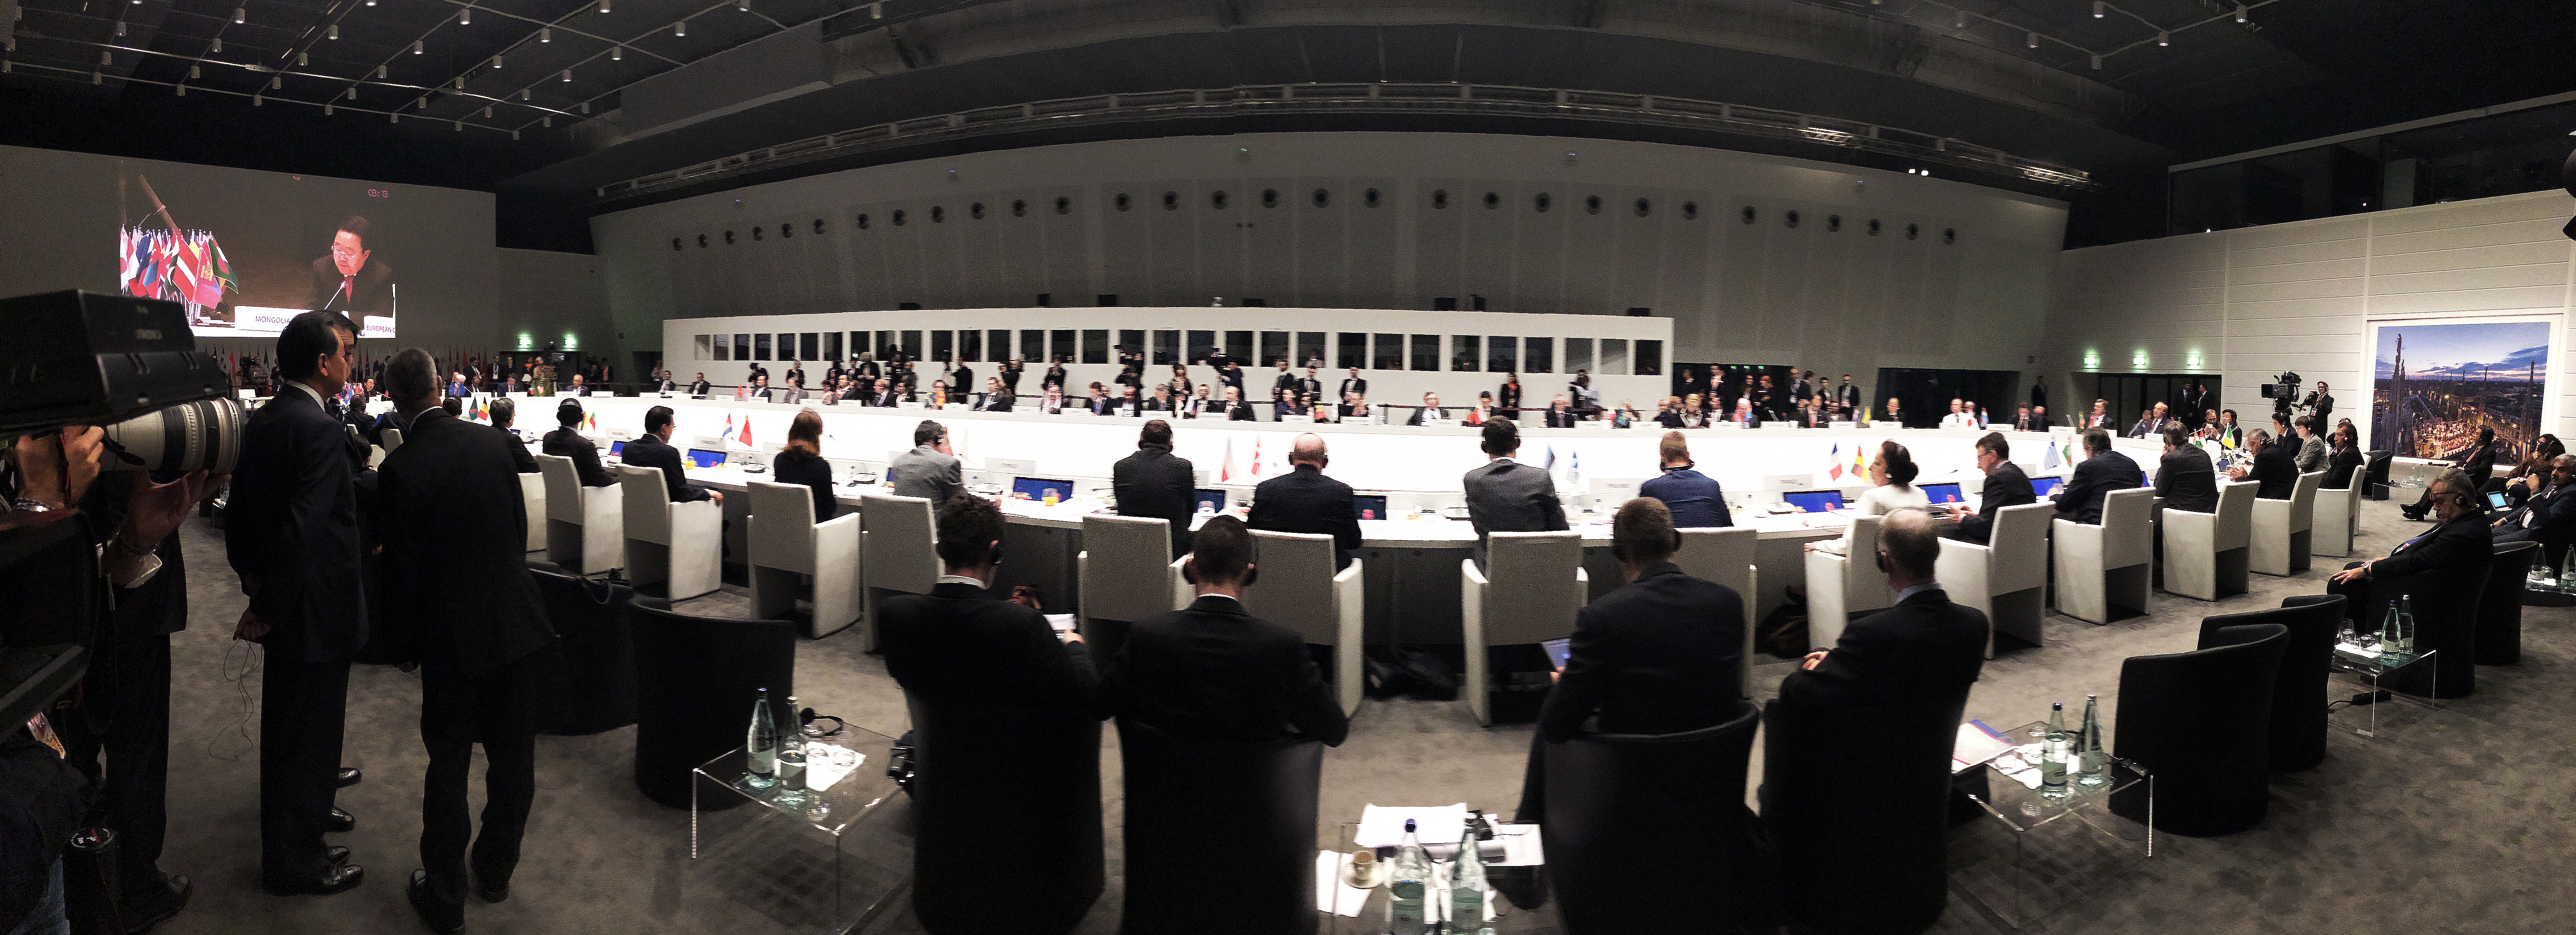 10th Summit of the Asia-Europe Meeting (ASEM) - Oct 2014 (PMO Photo by Alex Qiu)